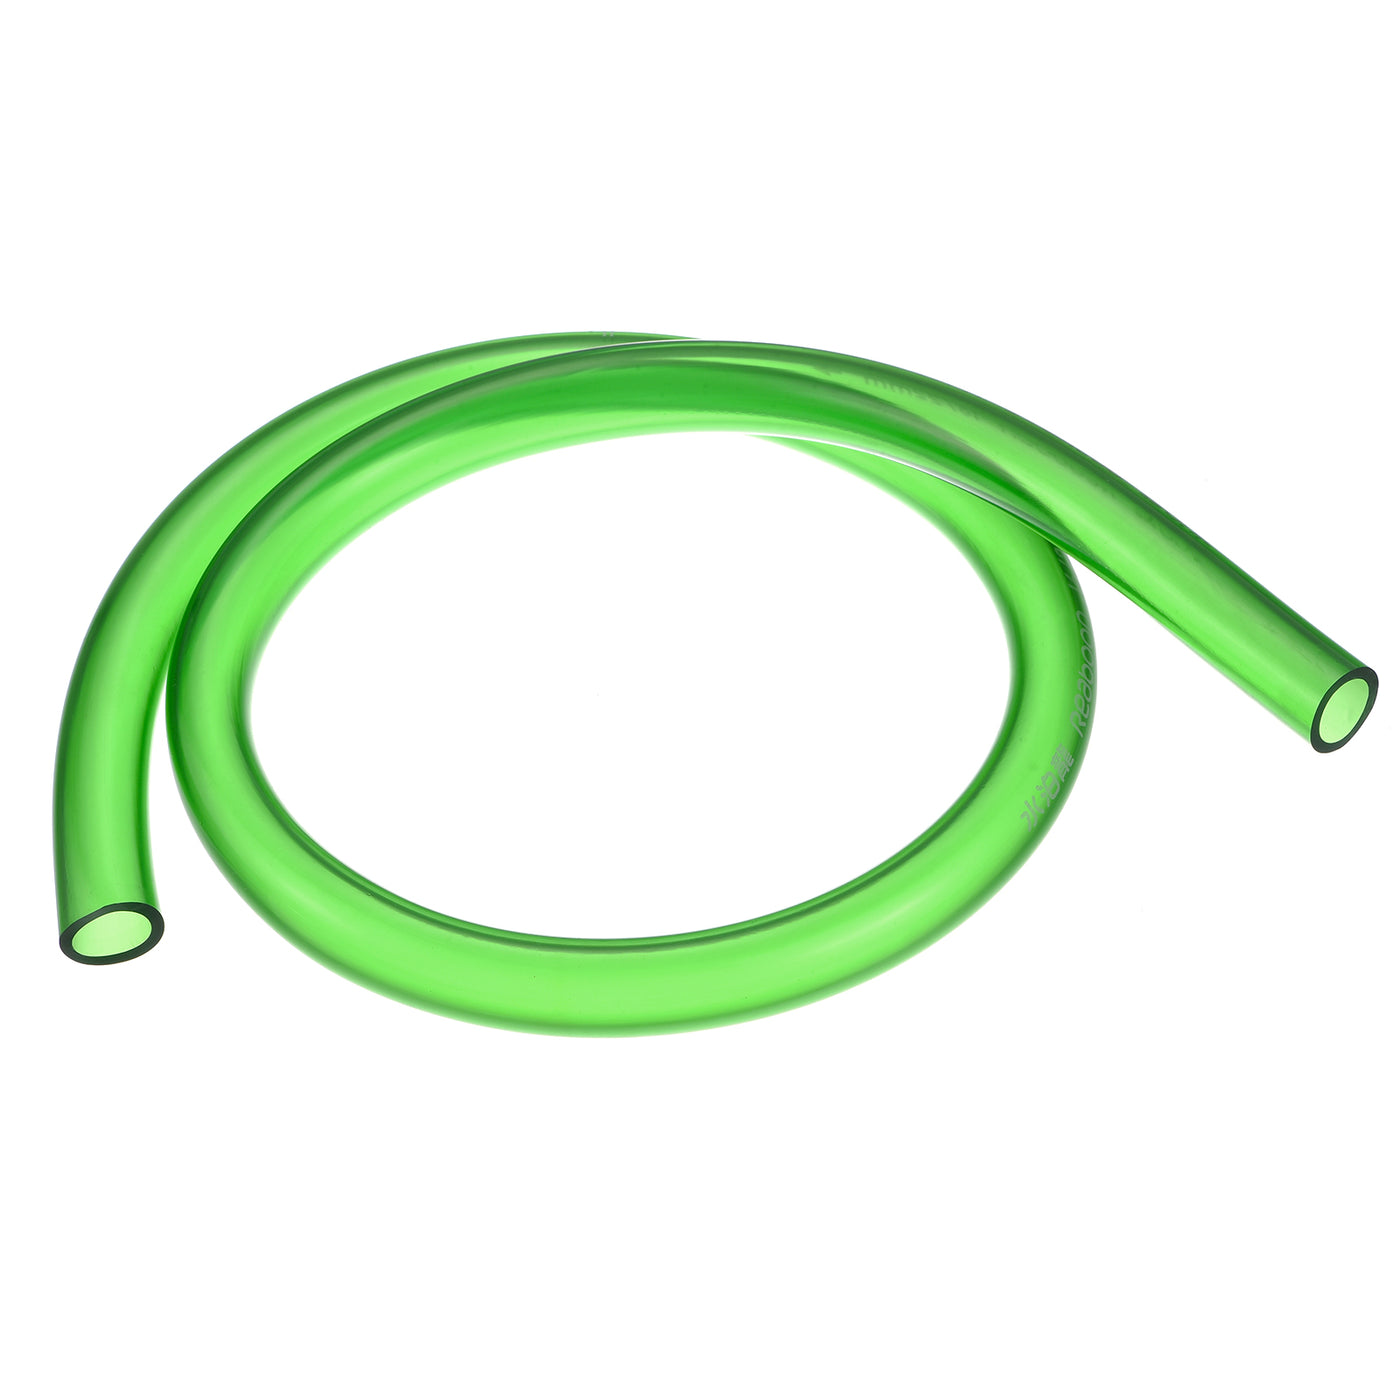 uxcell Uxcell PVC Tubing 5/8" ID, 55/64" OD 1Pcs 3.28 Ft for Transfer, Green